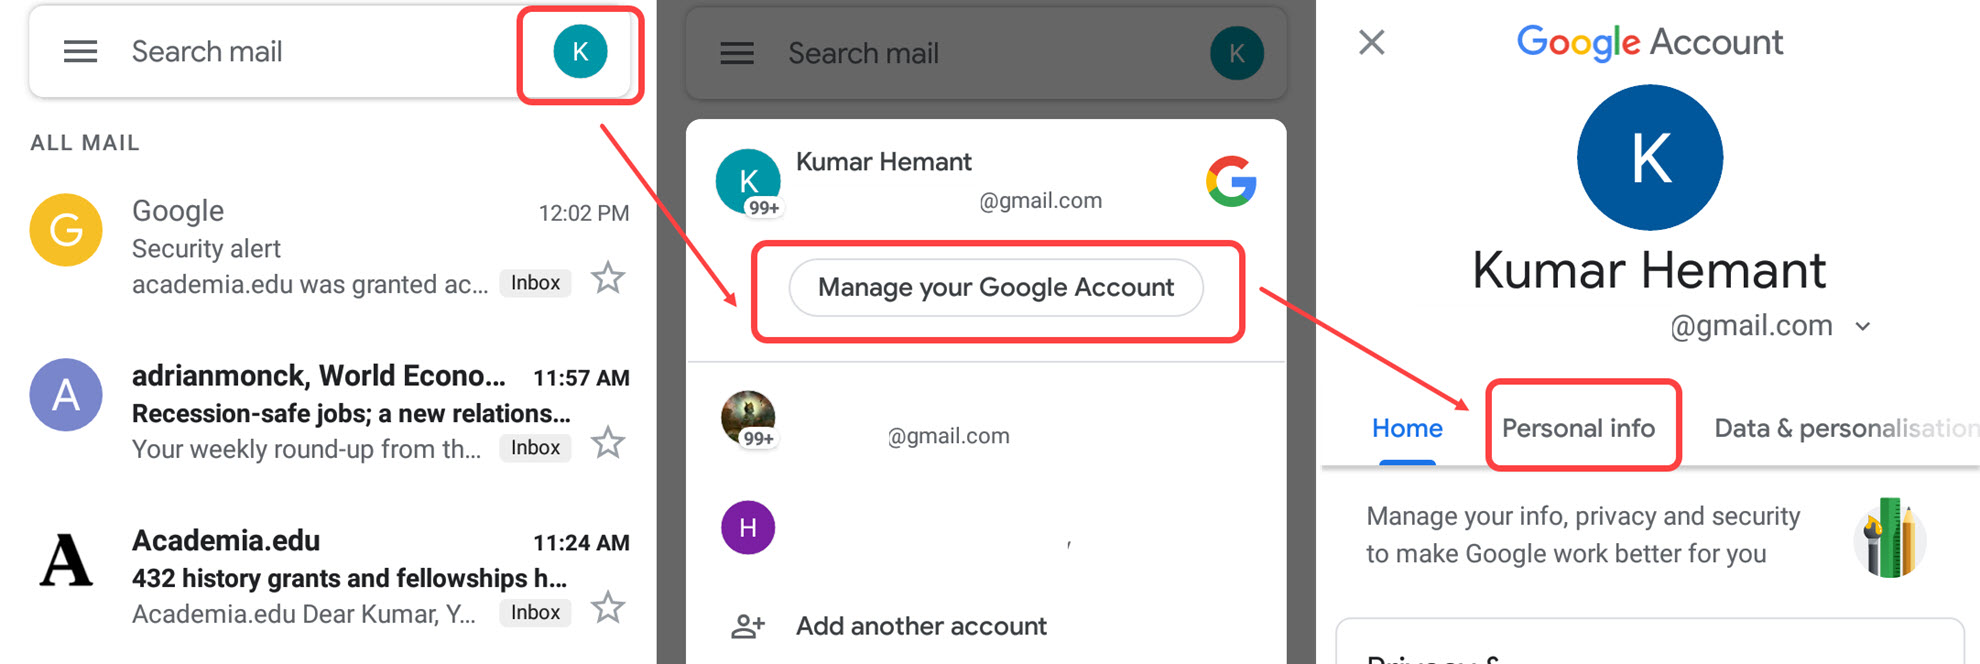 how-to-change-profile-picture-on-gmail-mobile